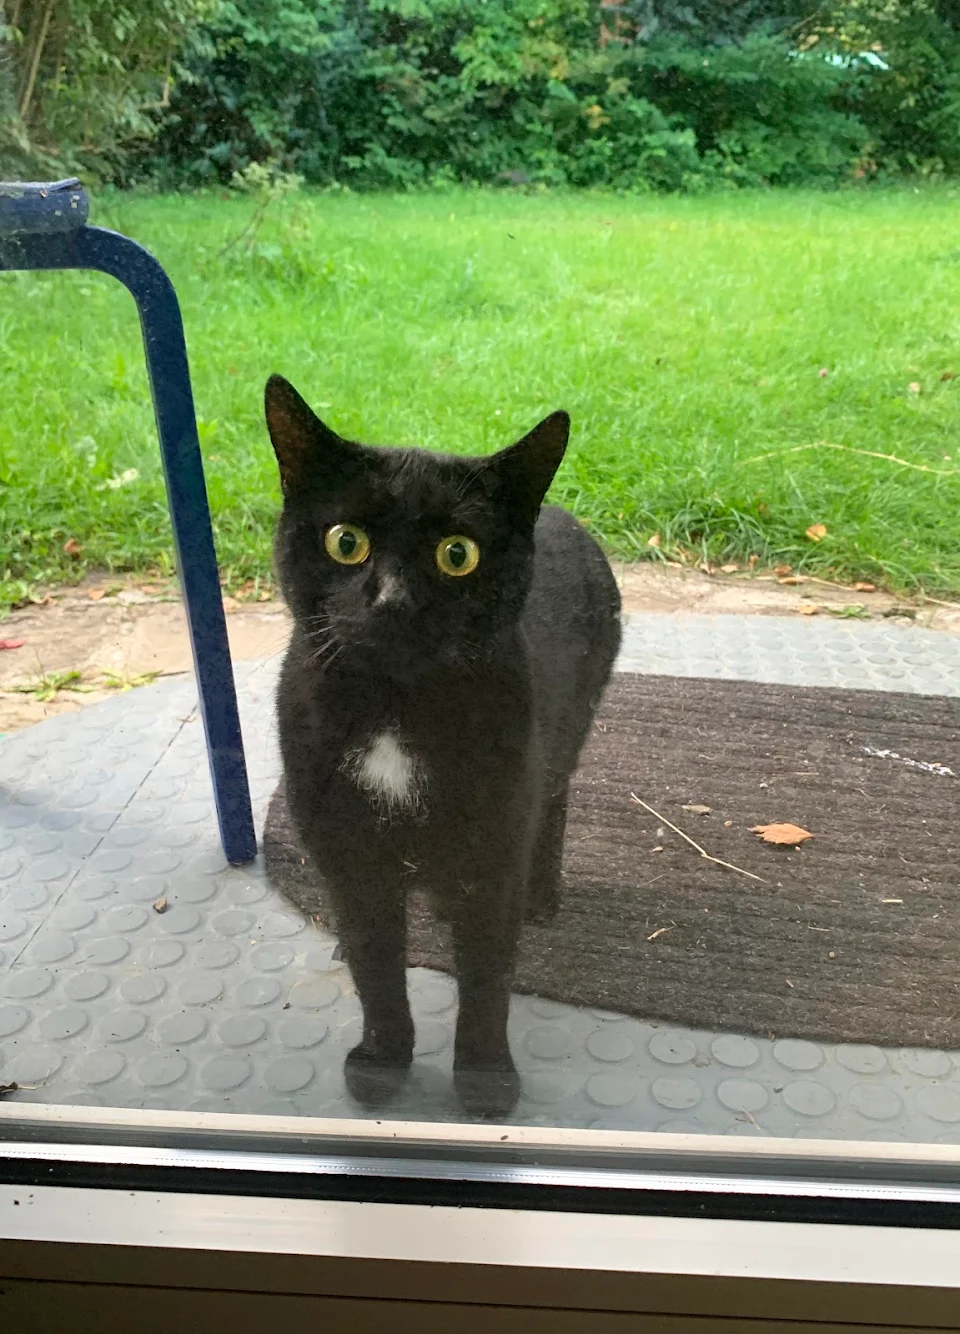 The neighbours cat, when I call my cats in for breakfast. Poor guy.